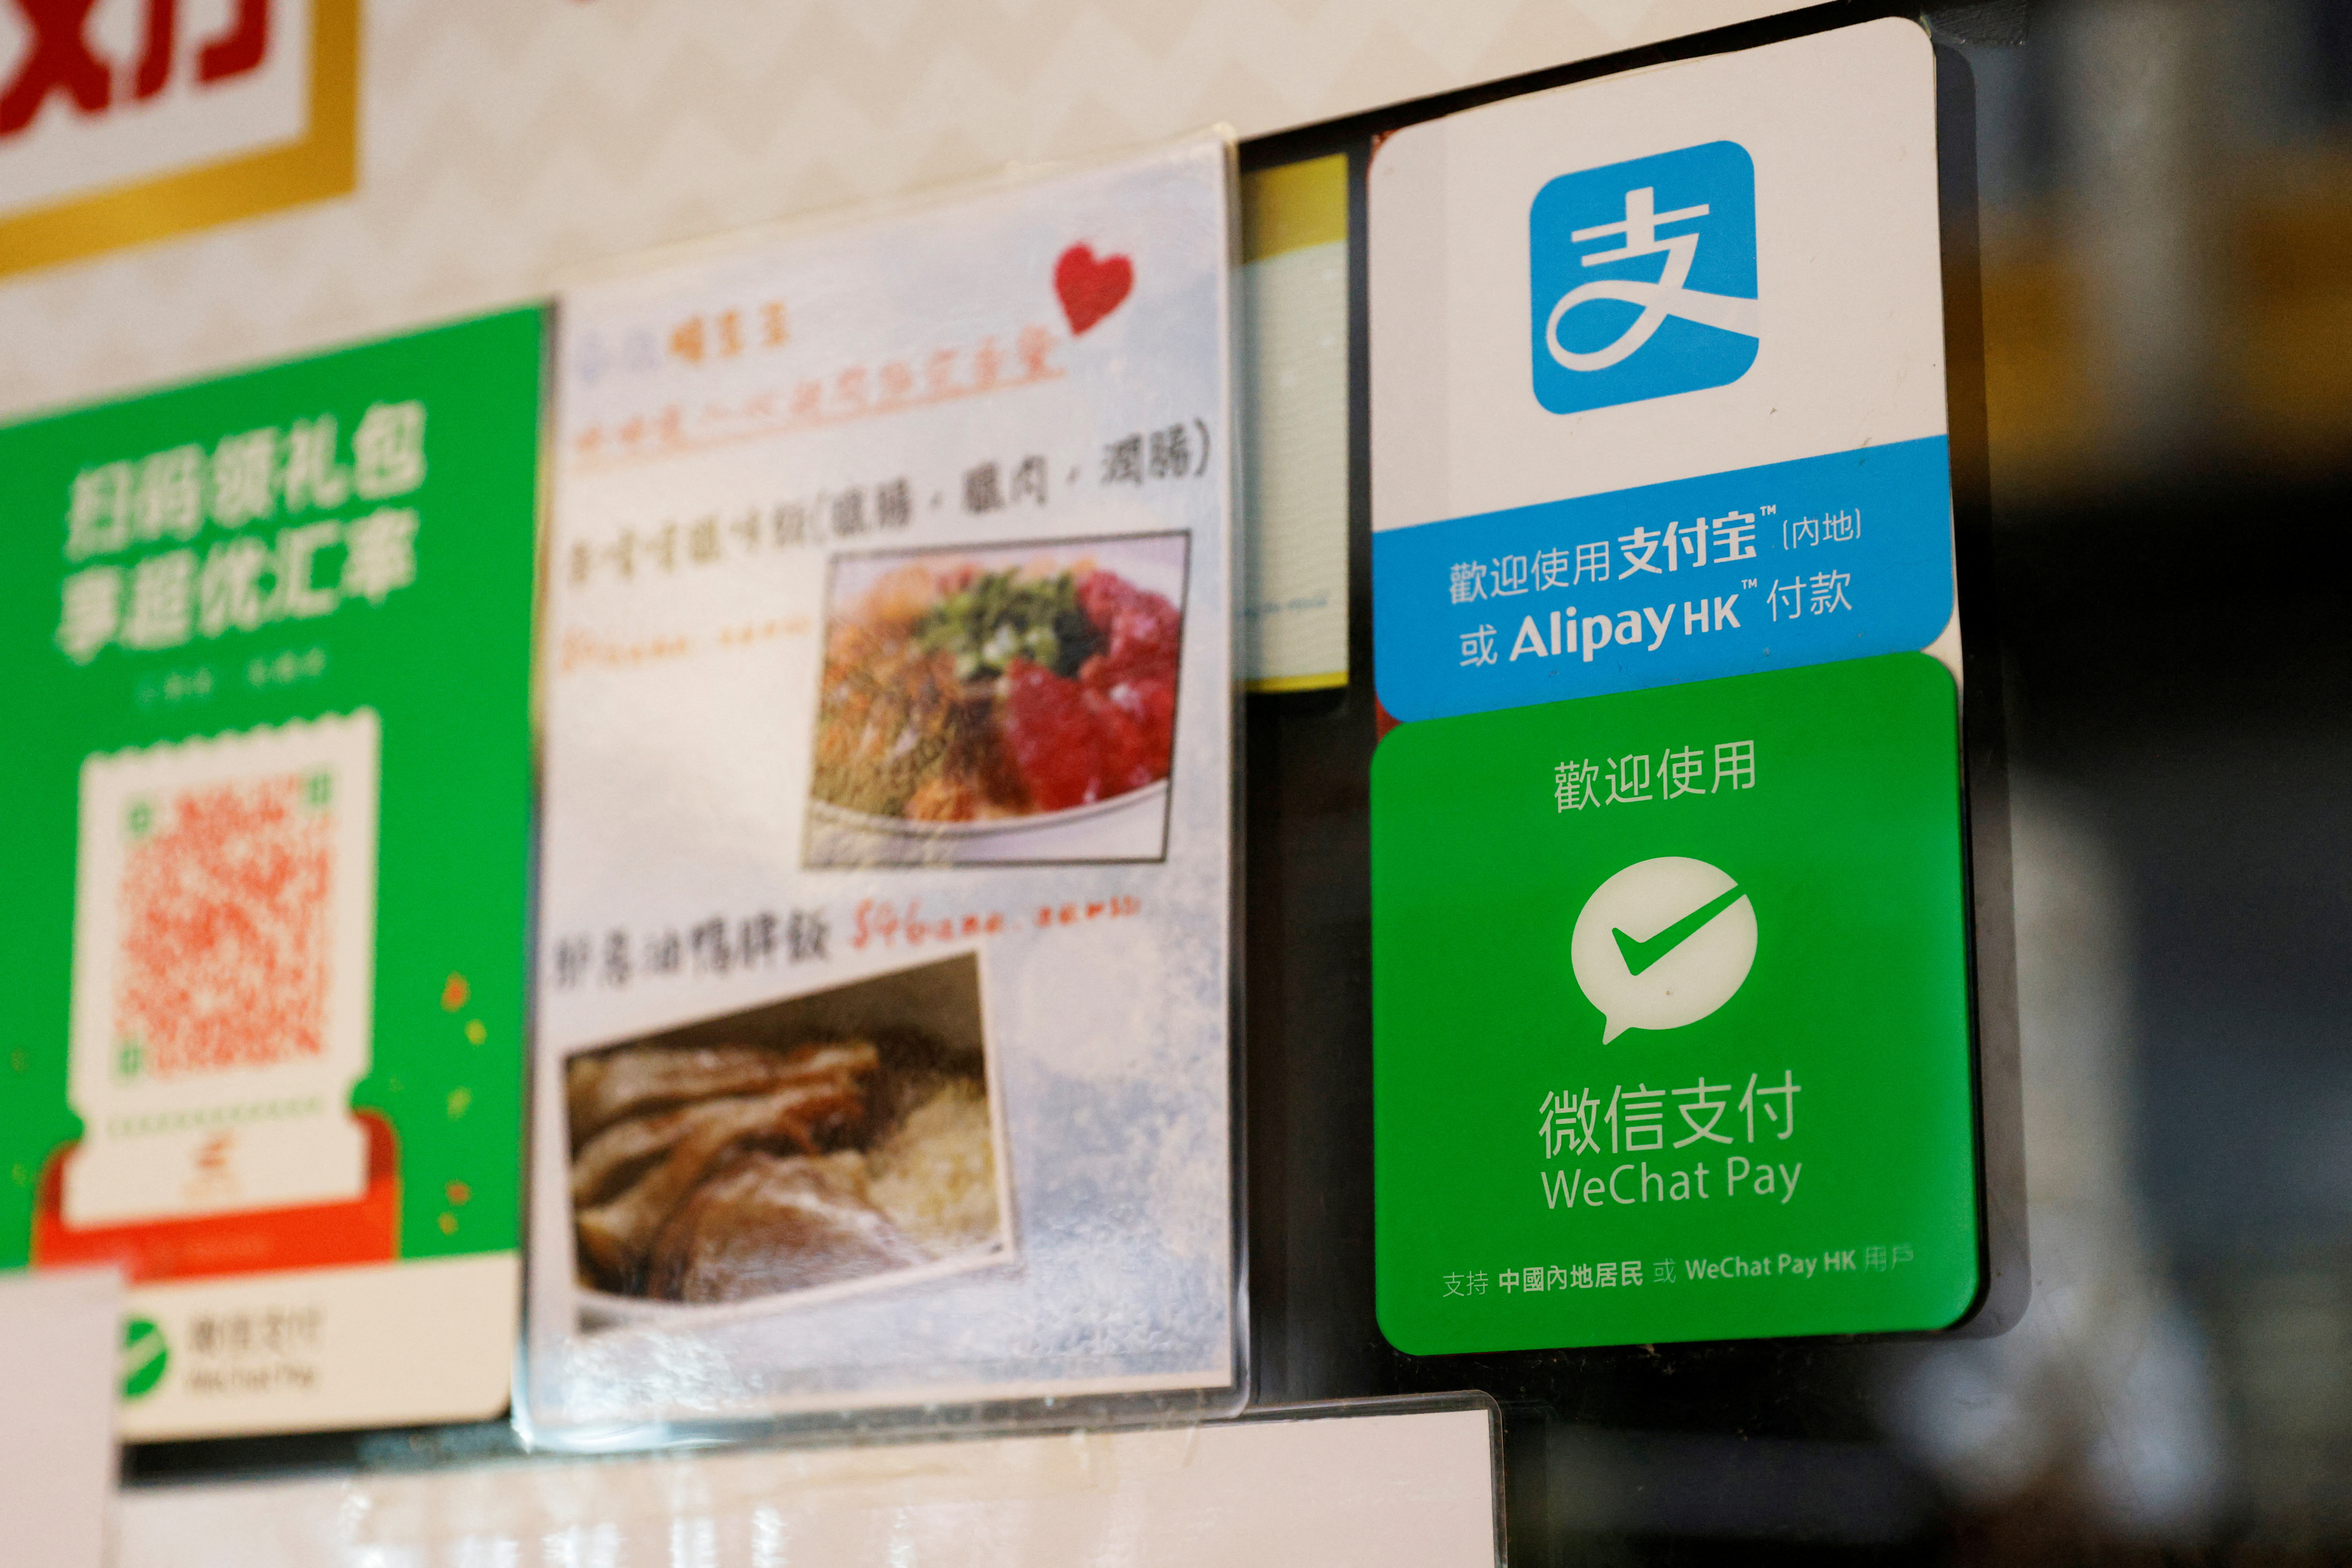 Logos for digital payment services Alipay by Ant Group, an affiliate of Alibaba Group Holding and WeChat Pay by Tencent Holdings are displayed outside a restaurant, in Hong Kong